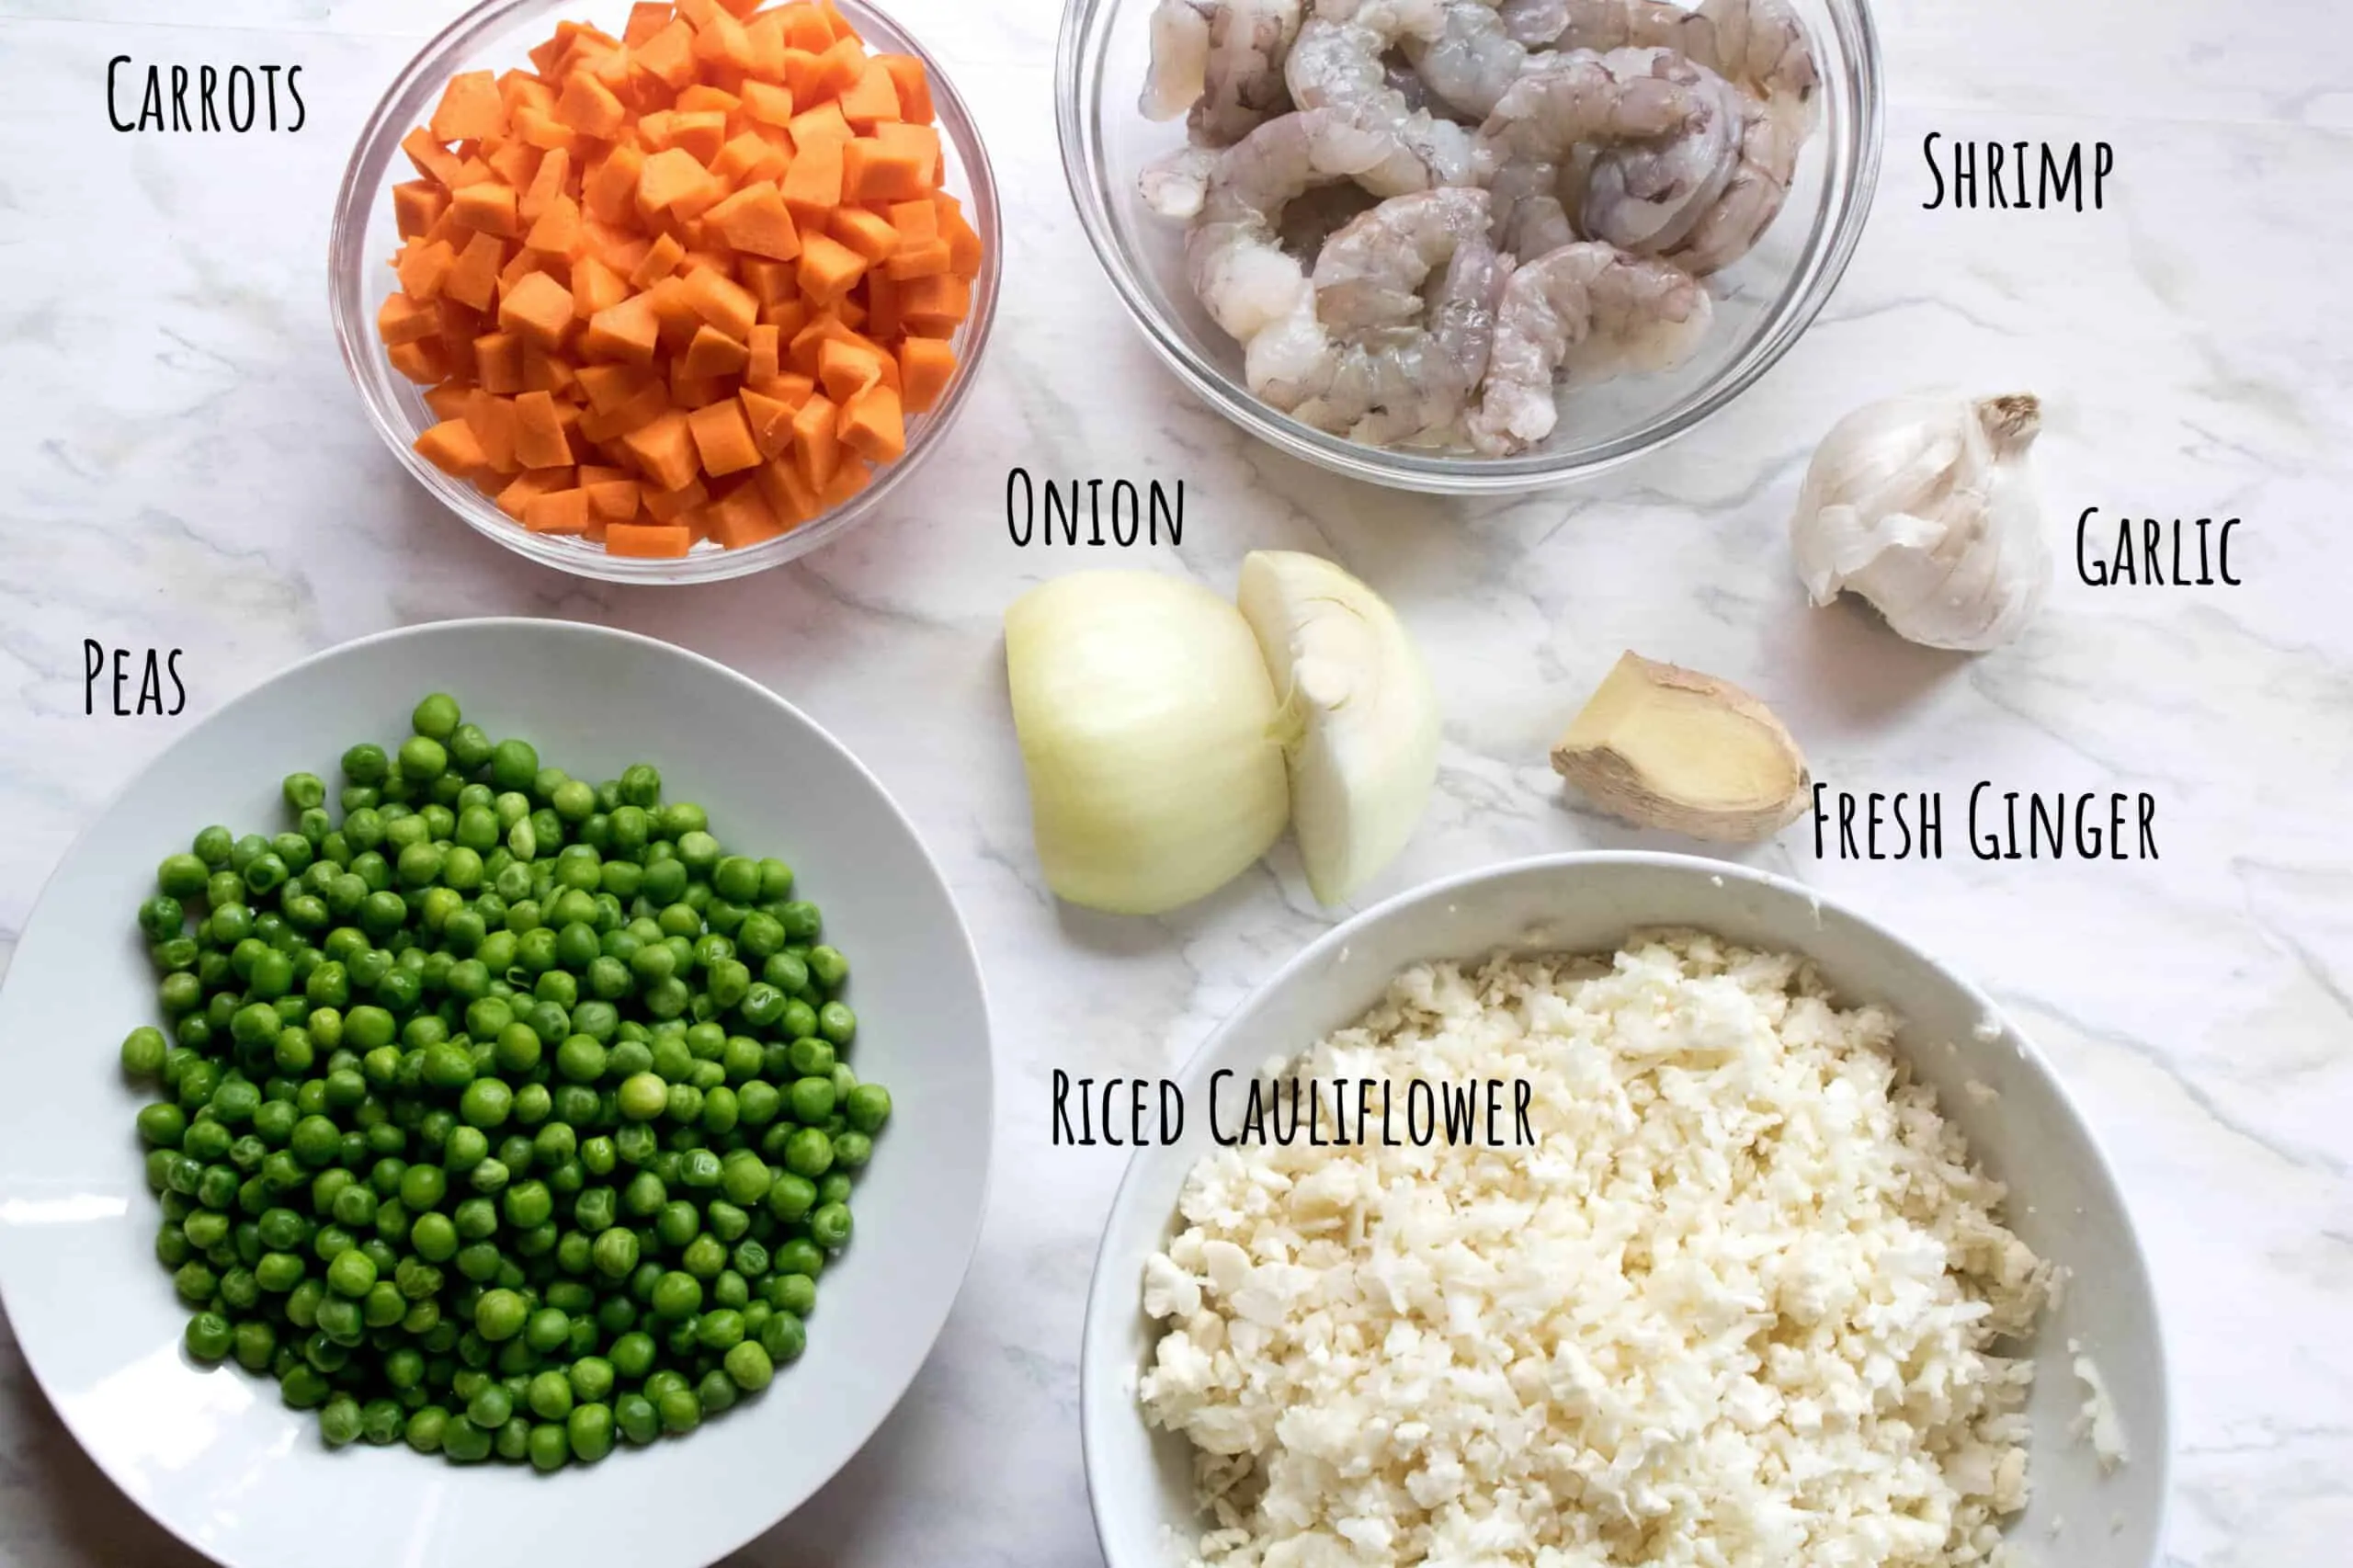 peas, carrots, onion, shrimp, garlic, and ginger and riced cauliflower on counter